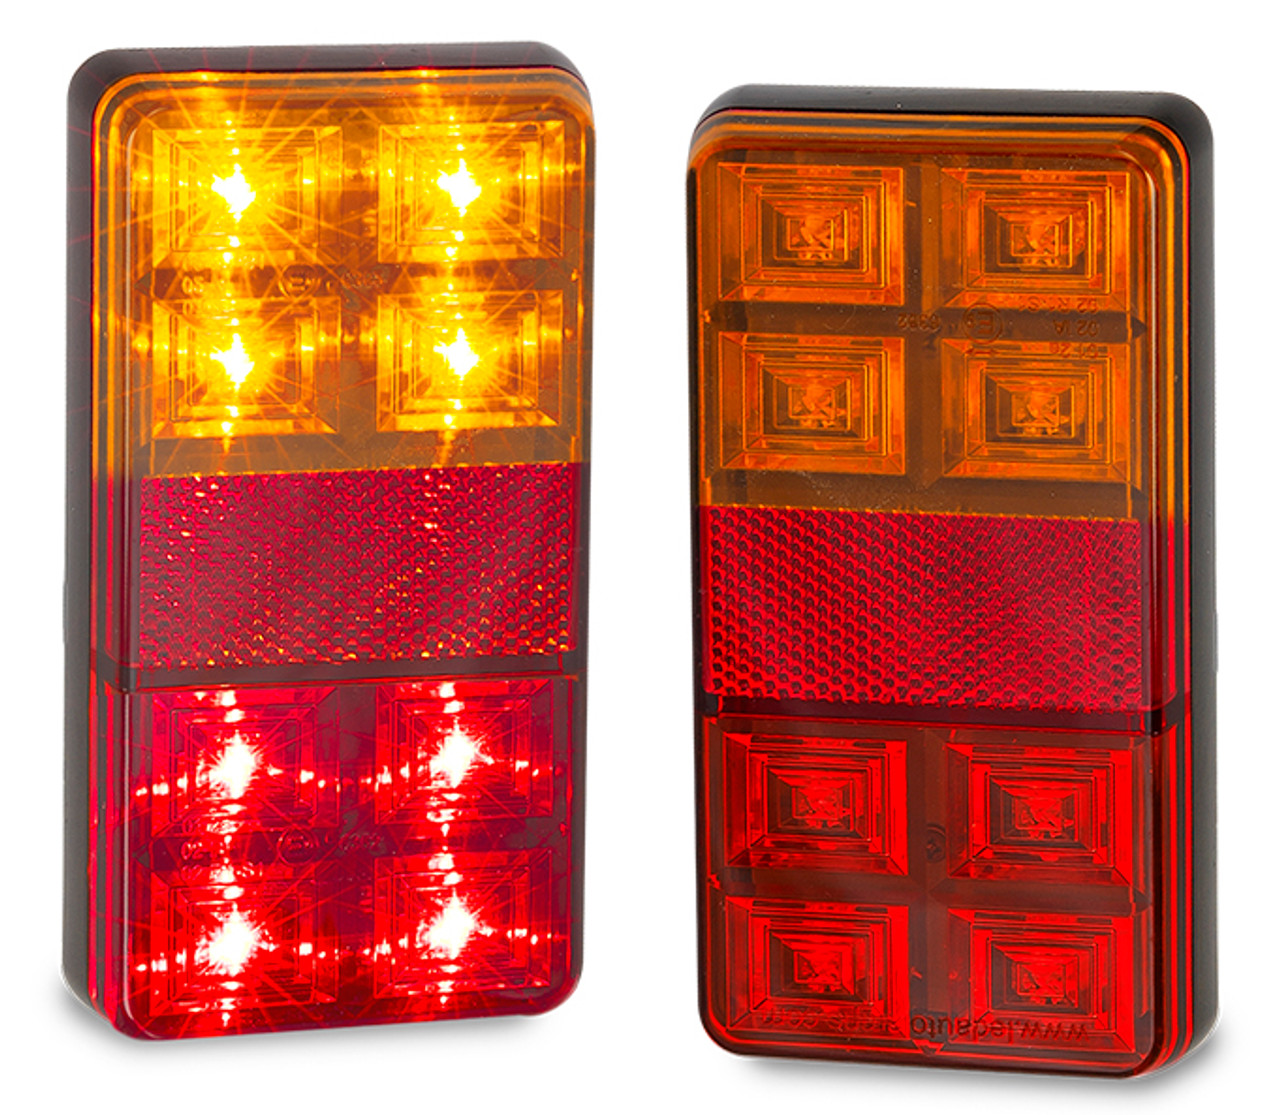 151BAR2 - Small Trailer Combination Tail Lights. Stop, Tail, Indicator, Reflector Light 12v Blister Twin Pack. LED Auto Lamps. Ultimate LED.